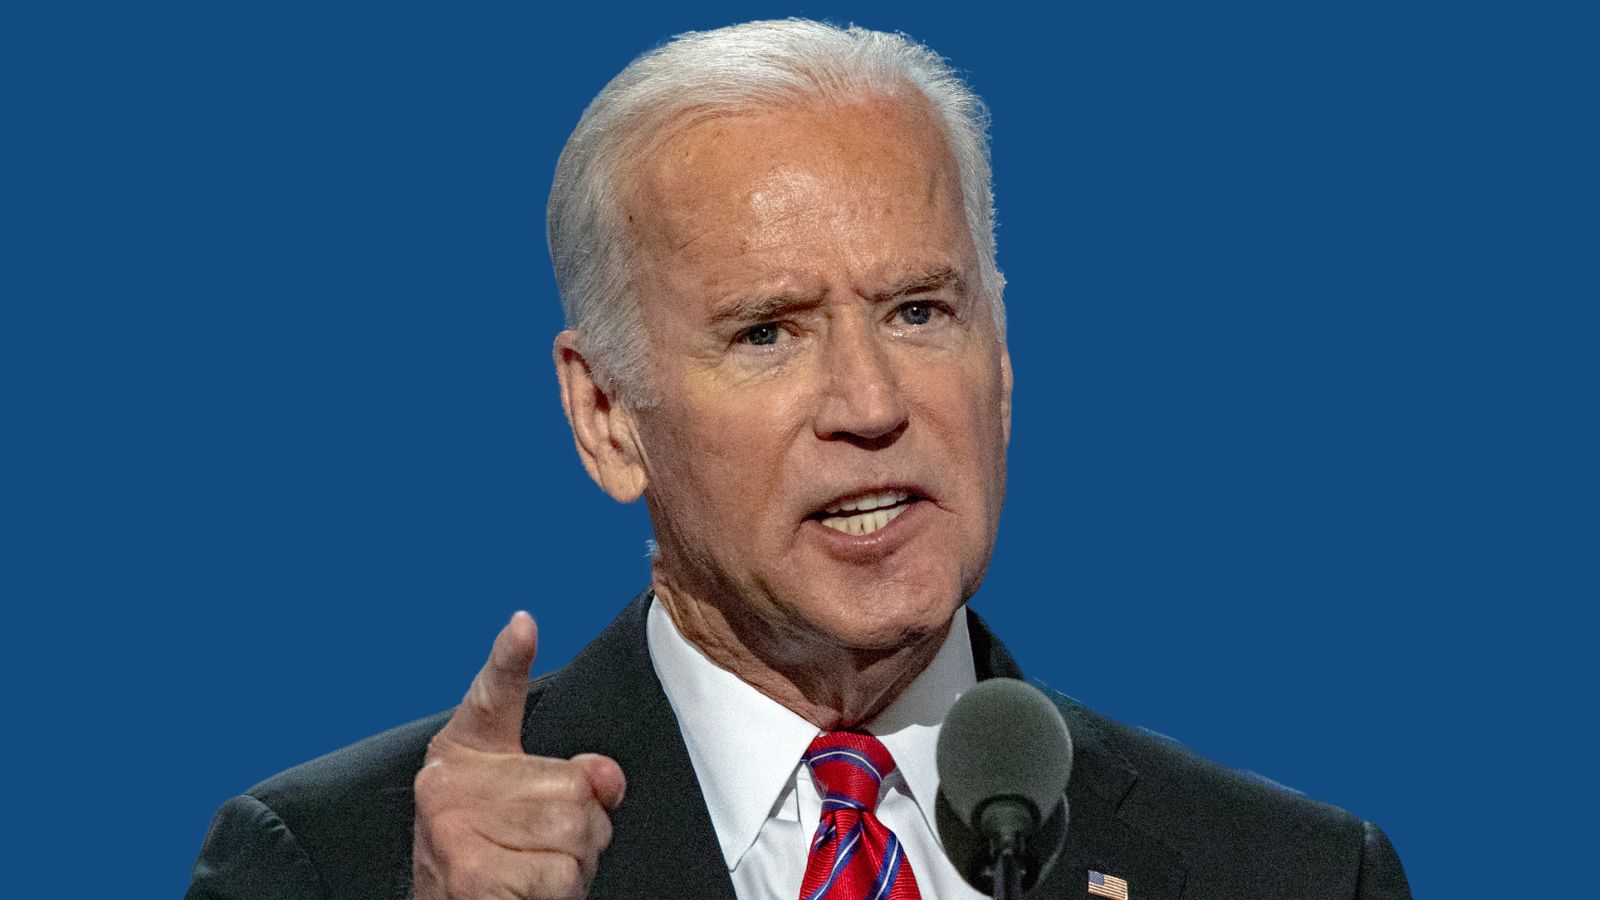 “The Silence Is Deafening”: Biden Declares Trump as a Threat to Democracy